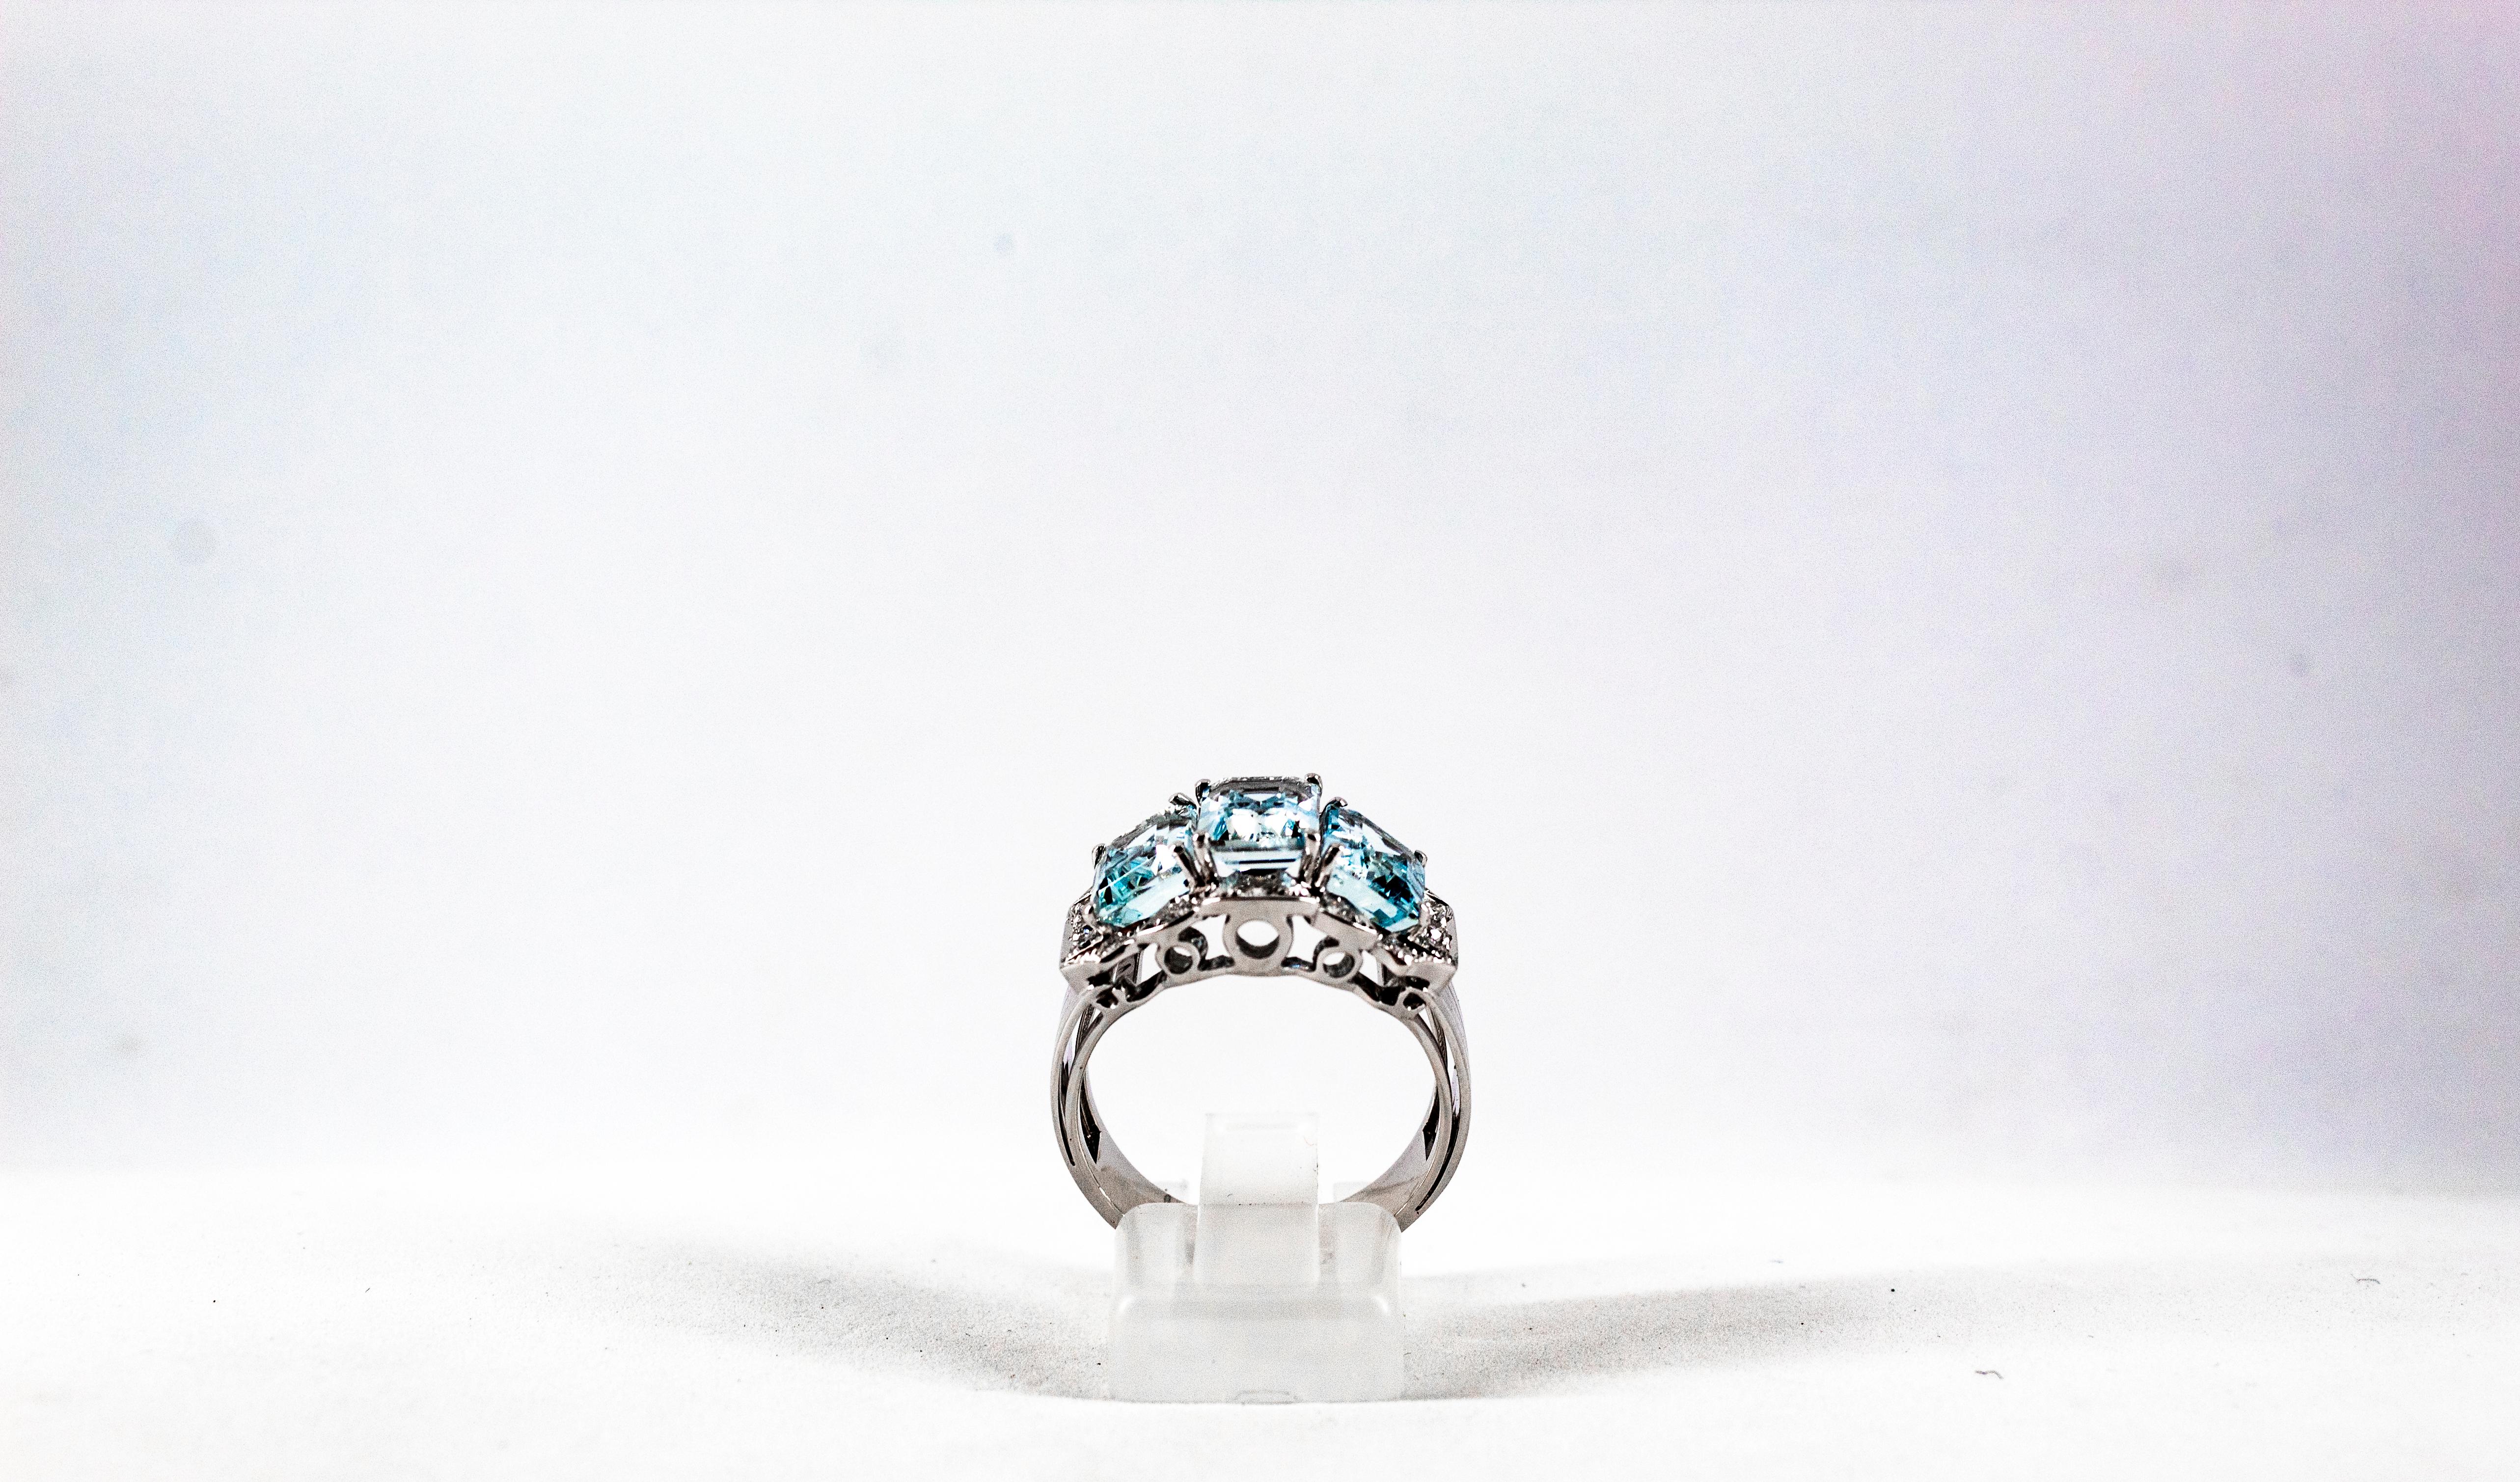 This Ring is made of Sterling Silver with a White Gold Plate.
This Ring has 0.45 Carats of White Brilliant Cut Zircon.
This Ring has 4.00 Carats of Emerald cut Aquamarine.

Size ITA: 17 USA: 8

We're a workshop so every piece is handmade,